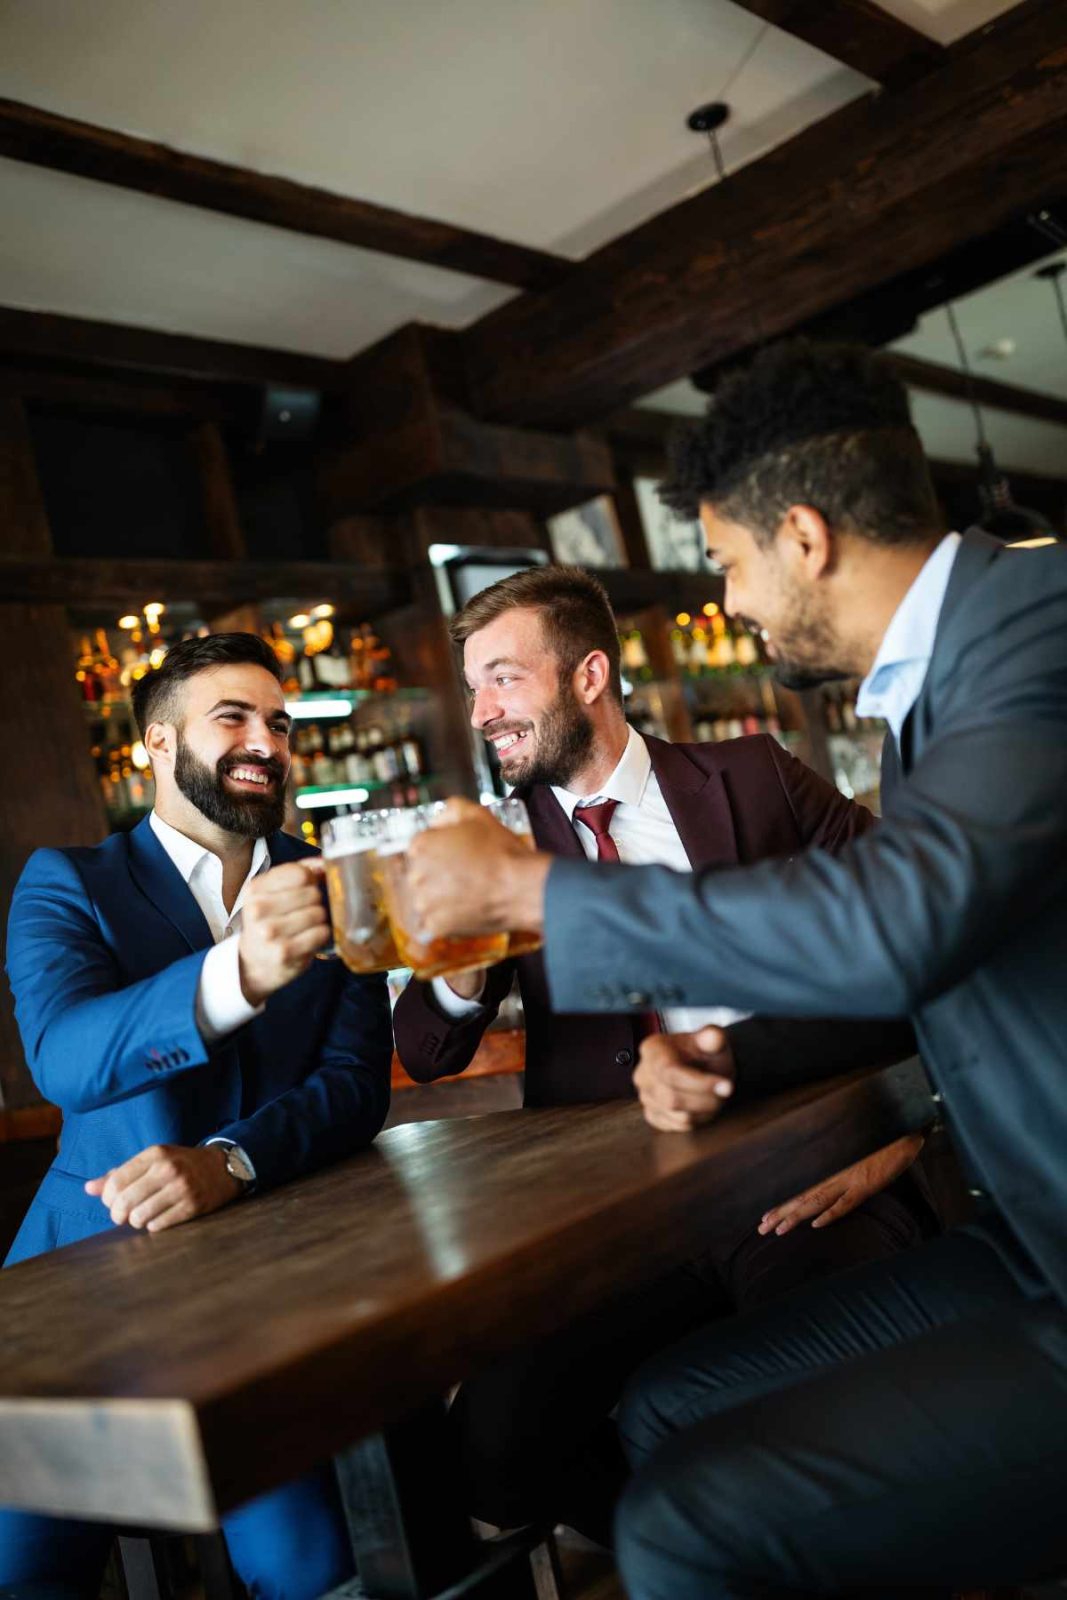 When it comes to enjoying a night out with friends or family, two popular places often come to mind: pubs and bars. These social venues offer a space for people to relax, socialize, and unwind. While the terms "pub" and "bar" are often used interchangeably, there are some key differences that set them apart.